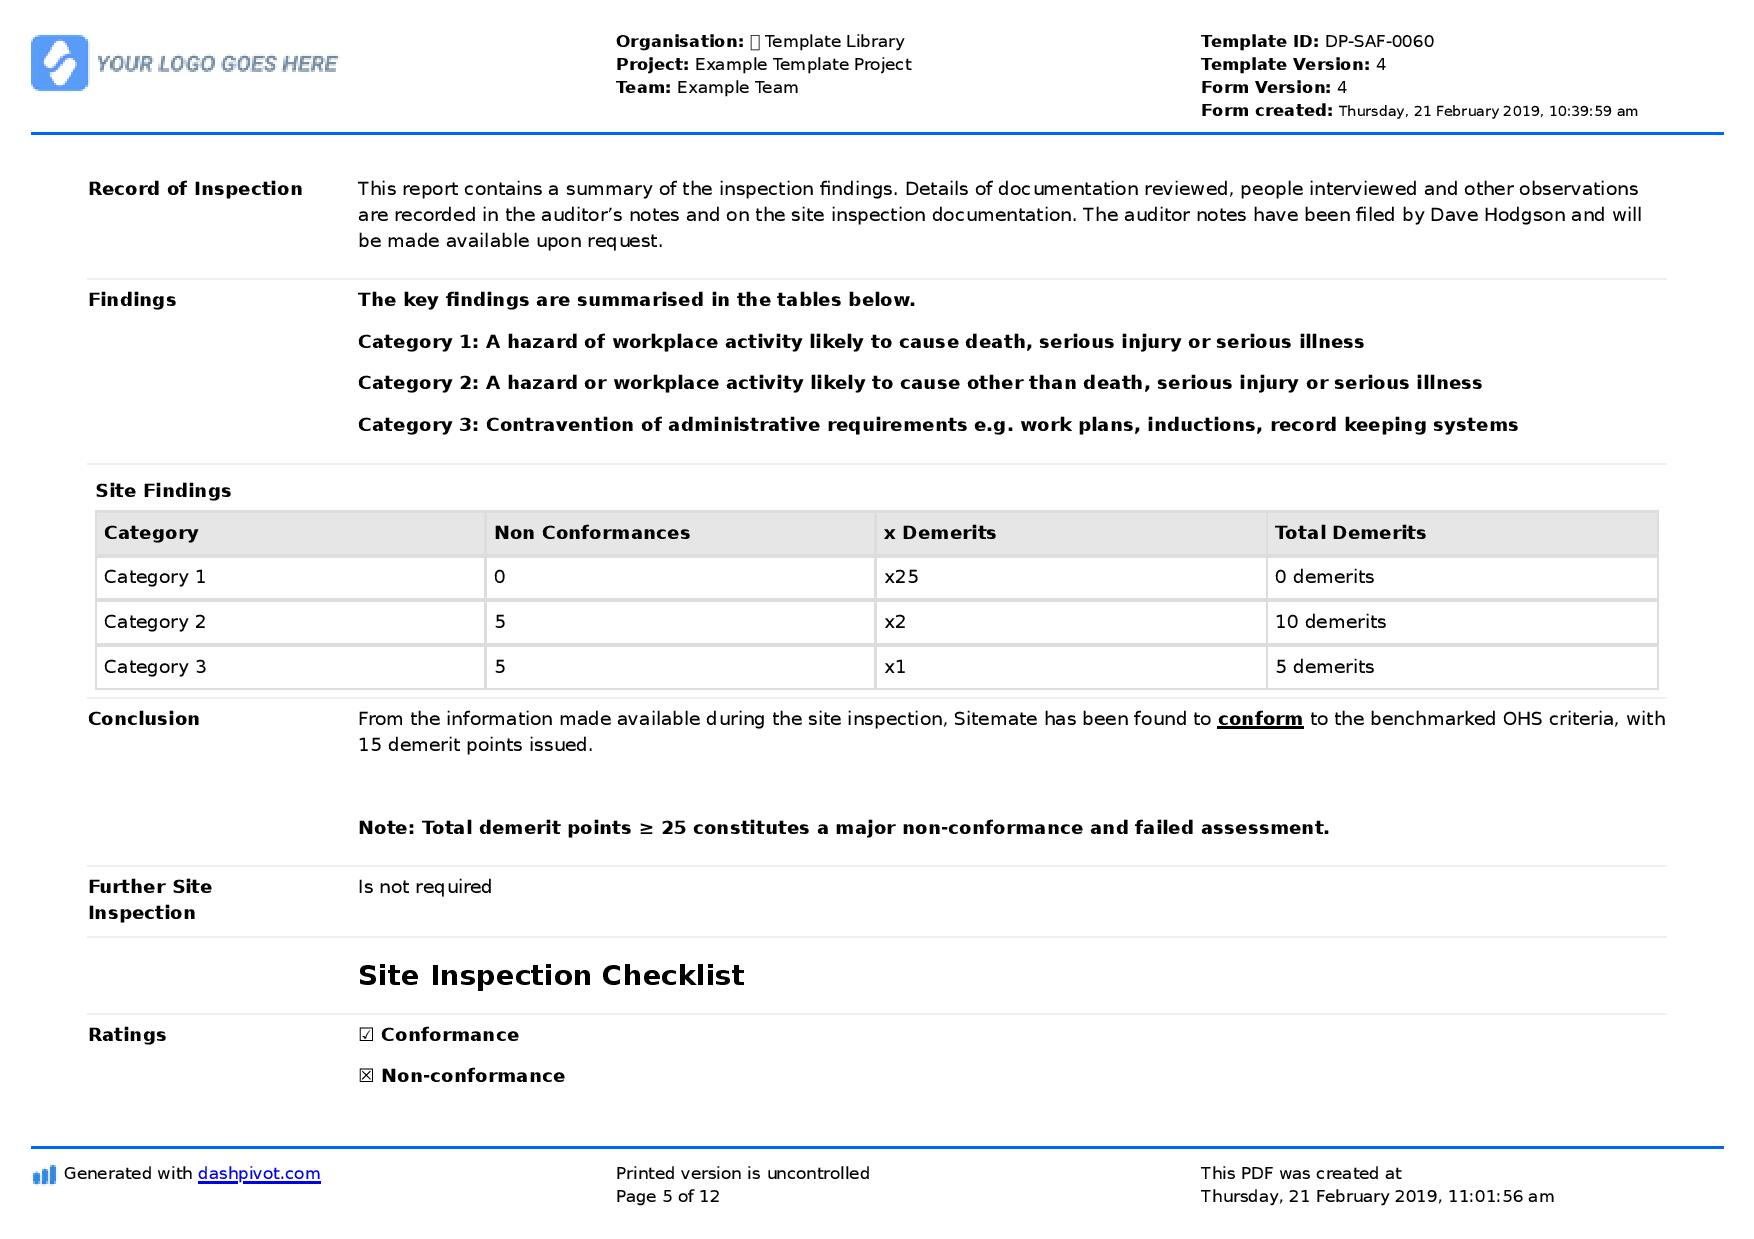 Site Inspection Report: Free template, sample and a proven format In Site Visit Report Template Free Download